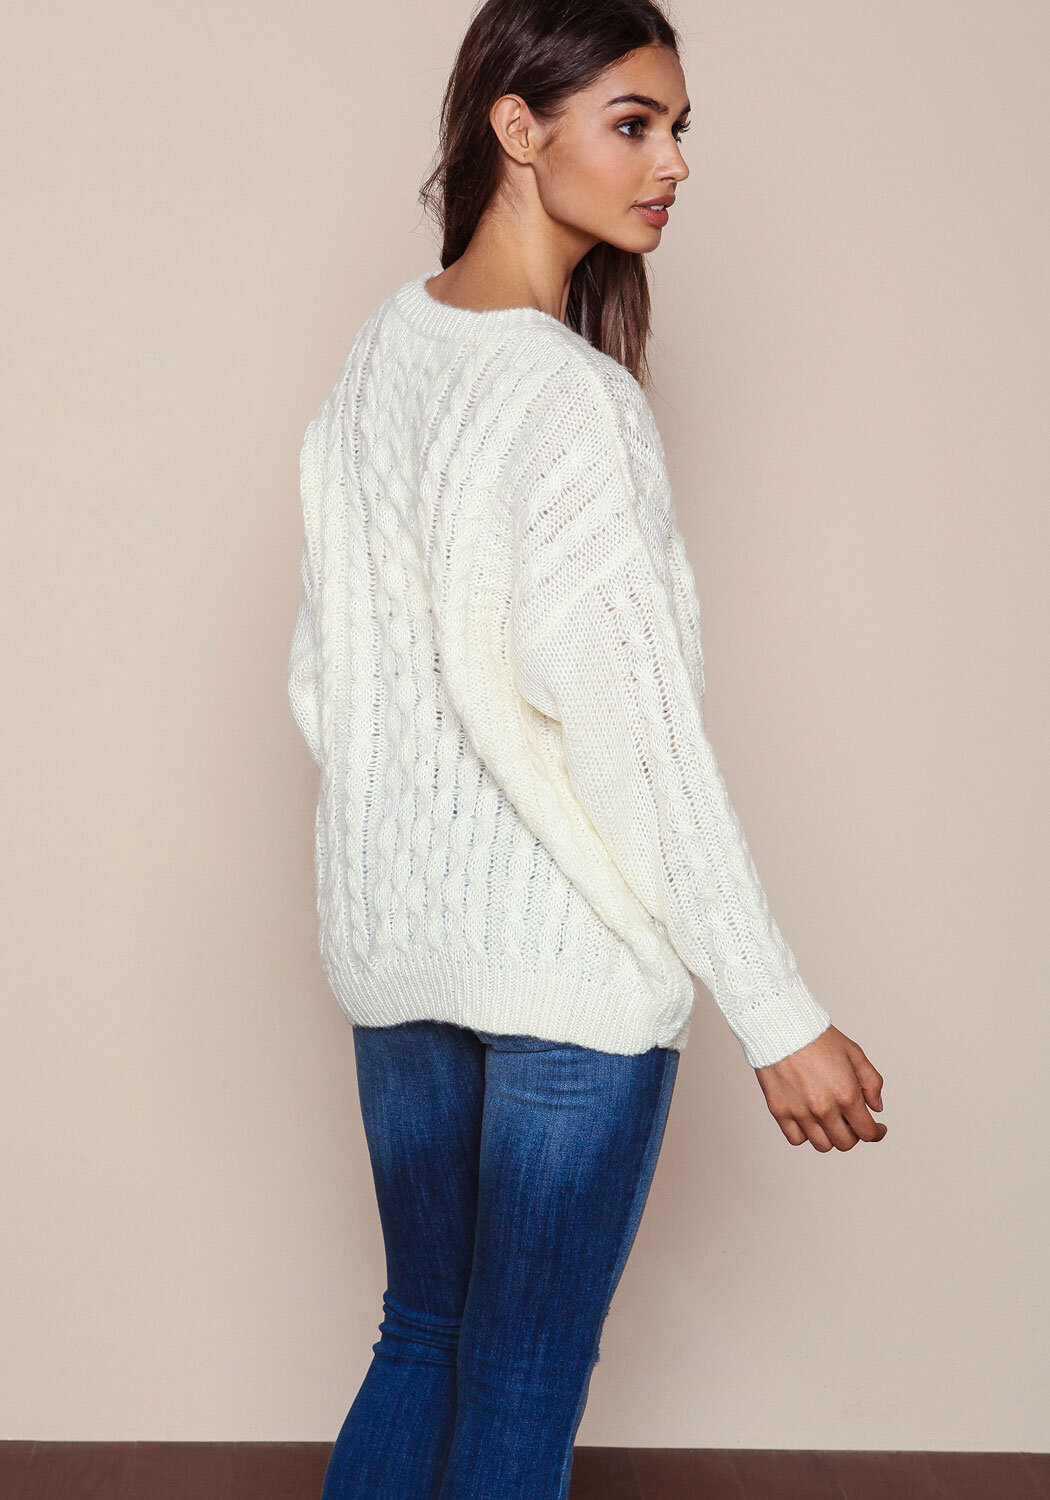 Junior Clothing | Ivory Chunky Knit High Low Sweater | Loveculture.com